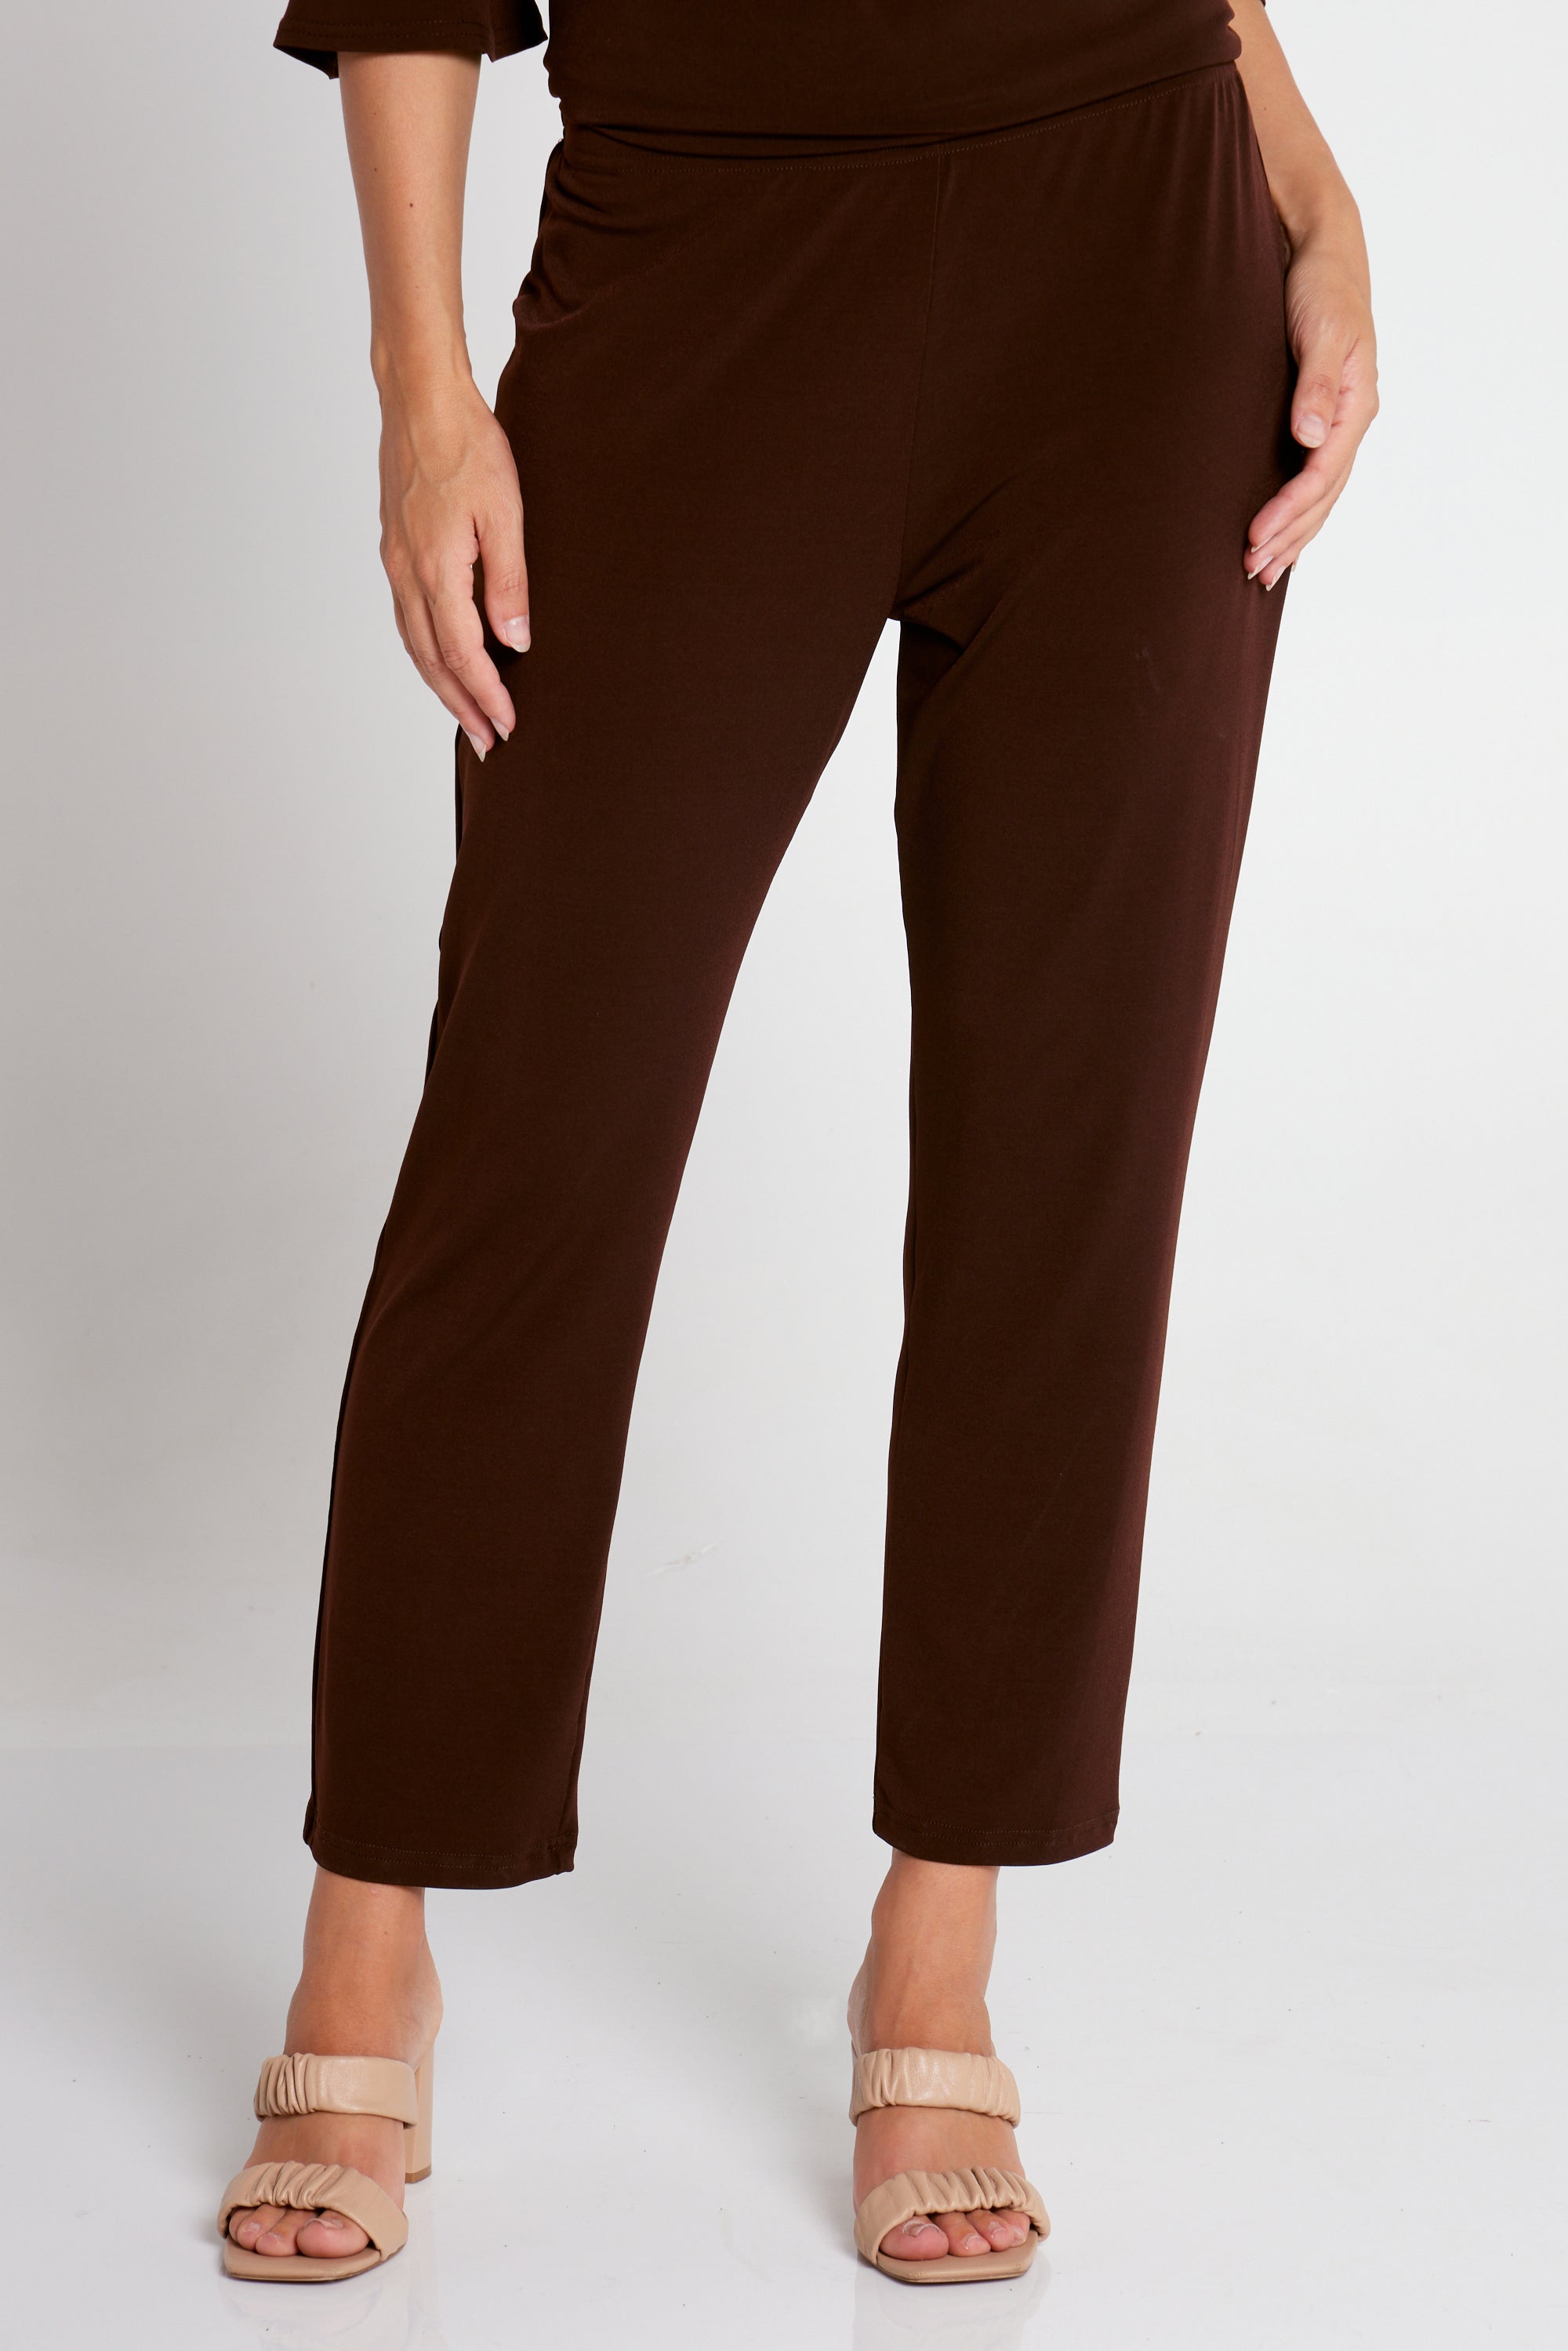 Superette | Max Pant - Chocolate Brown